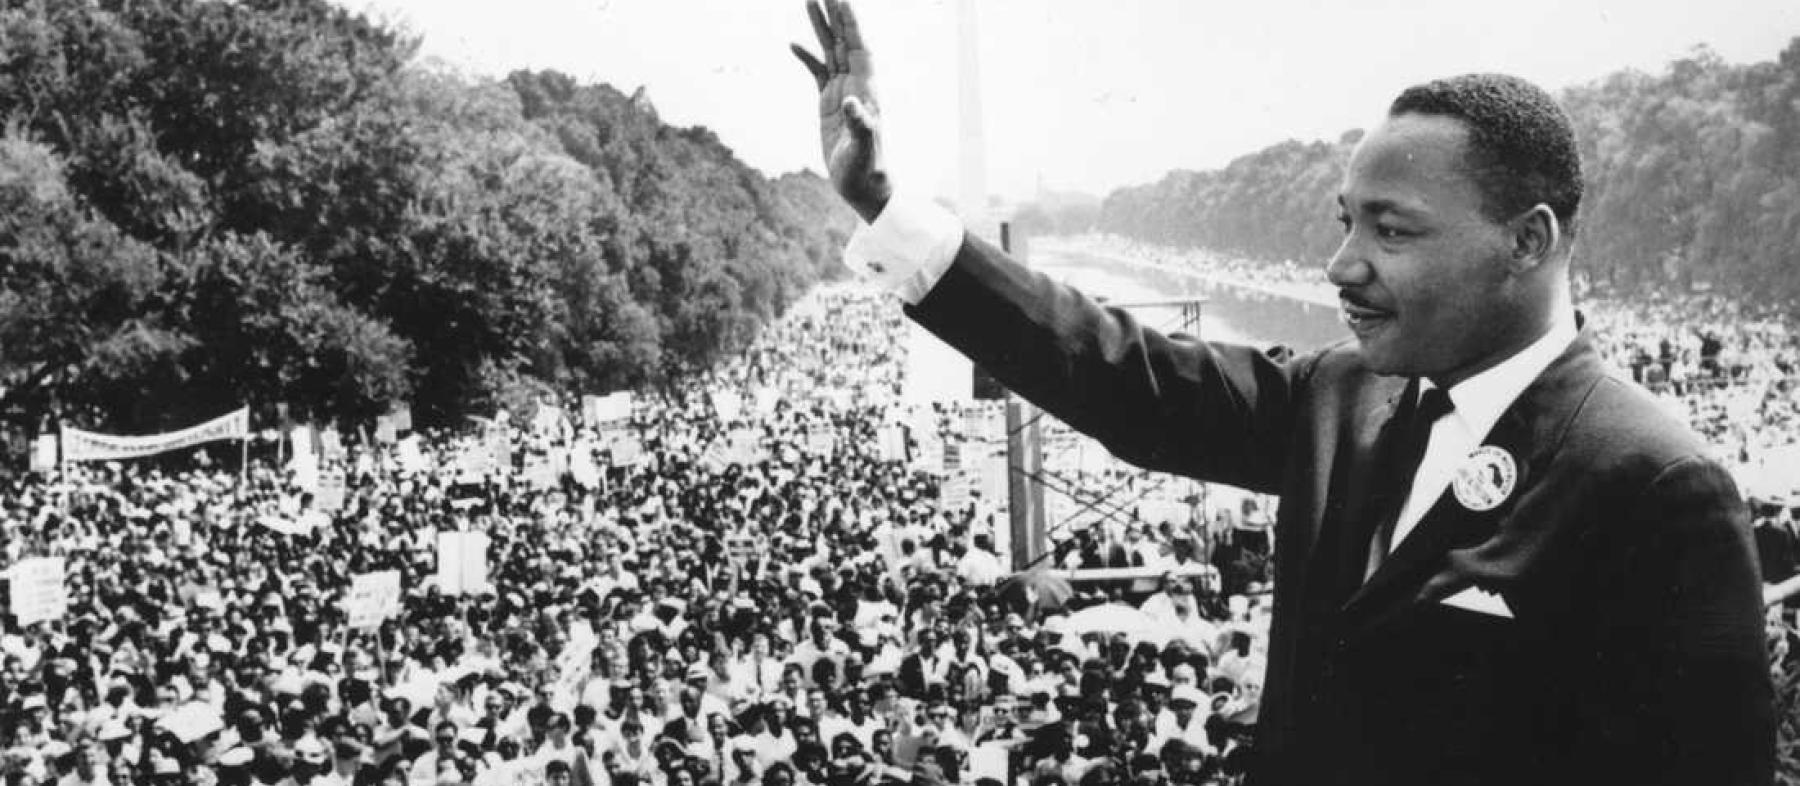 Martin Luther King Jr waves at a crowd